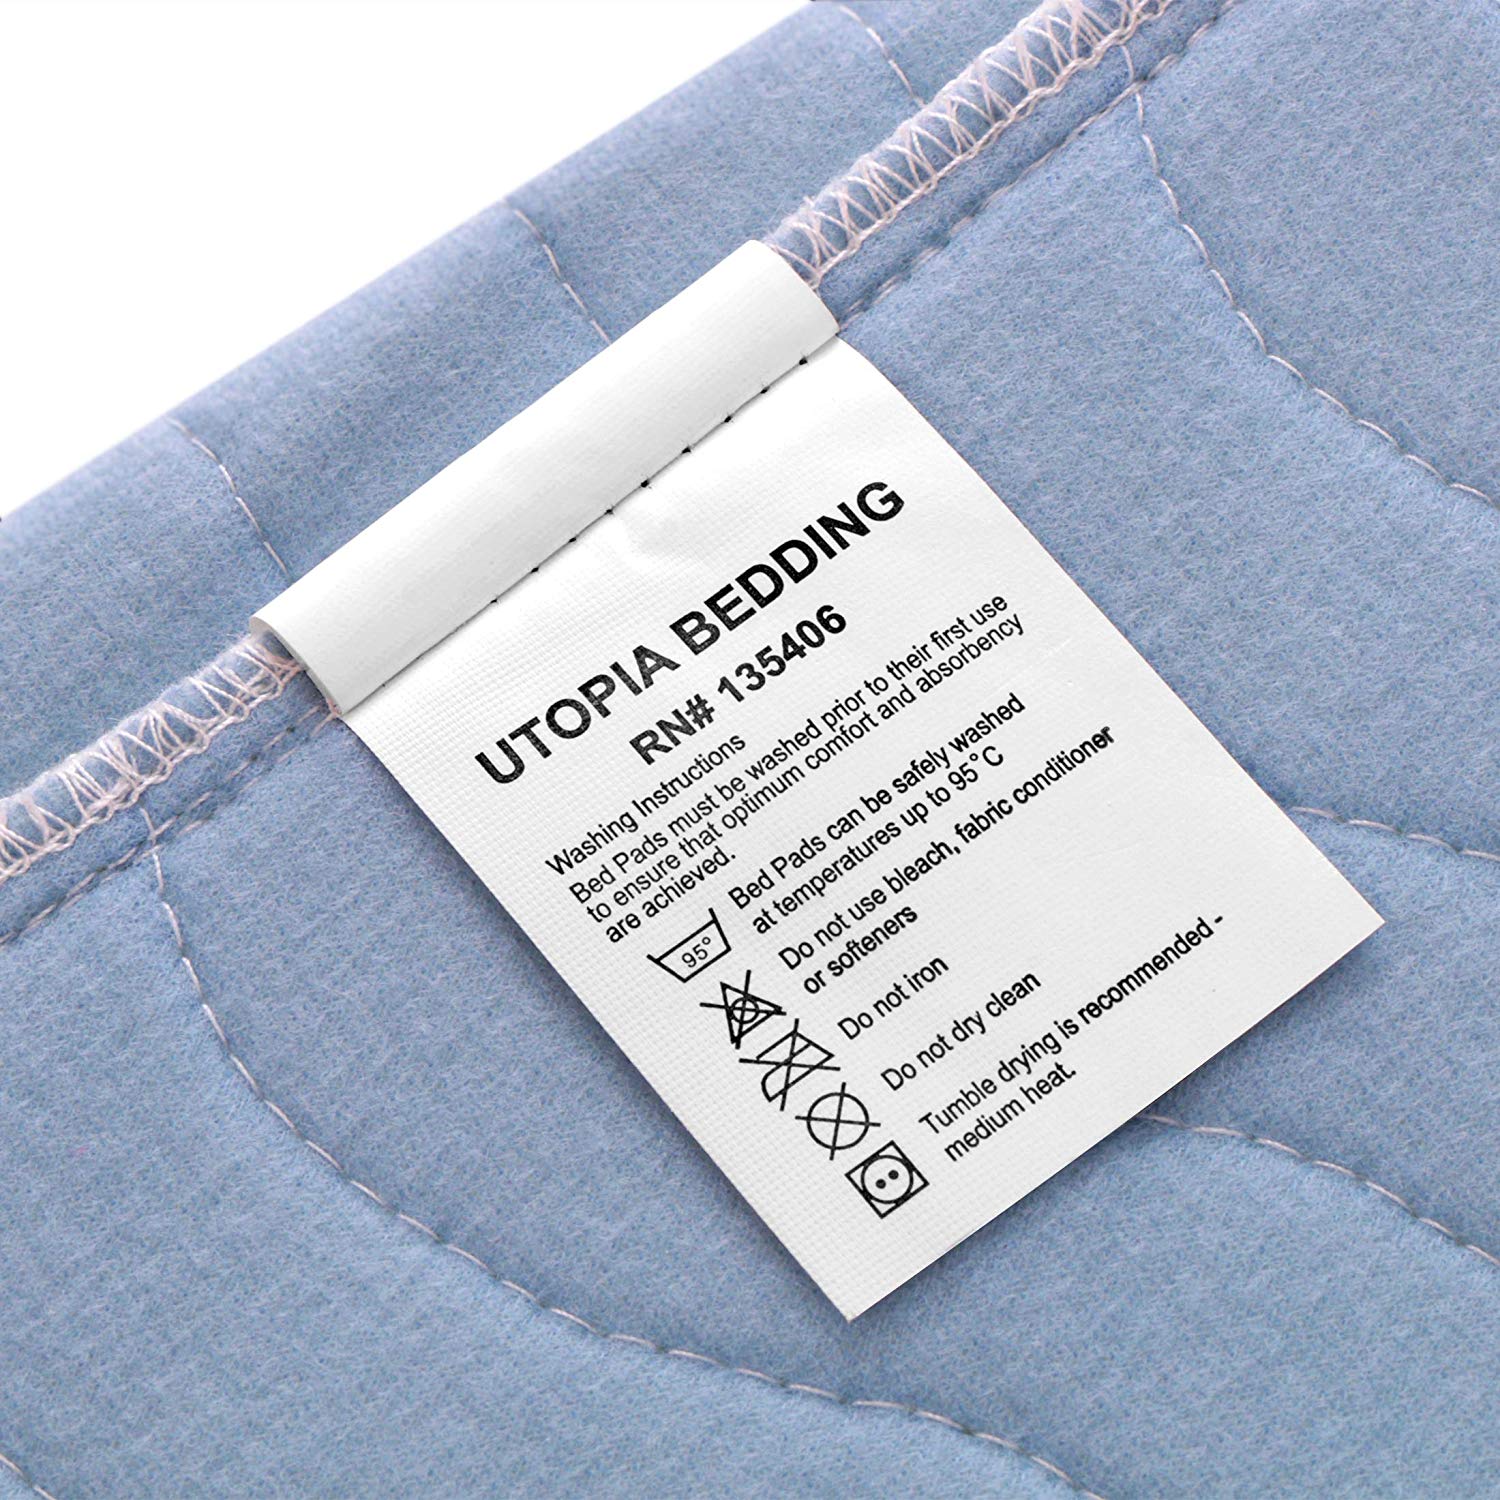 Utopia Bedding (Pack of 4) Waterproof Incontinence Pads Quilted Washable &  Absorbent Bed Pad for Adults and Kids 34 x 36 inches (Blue)